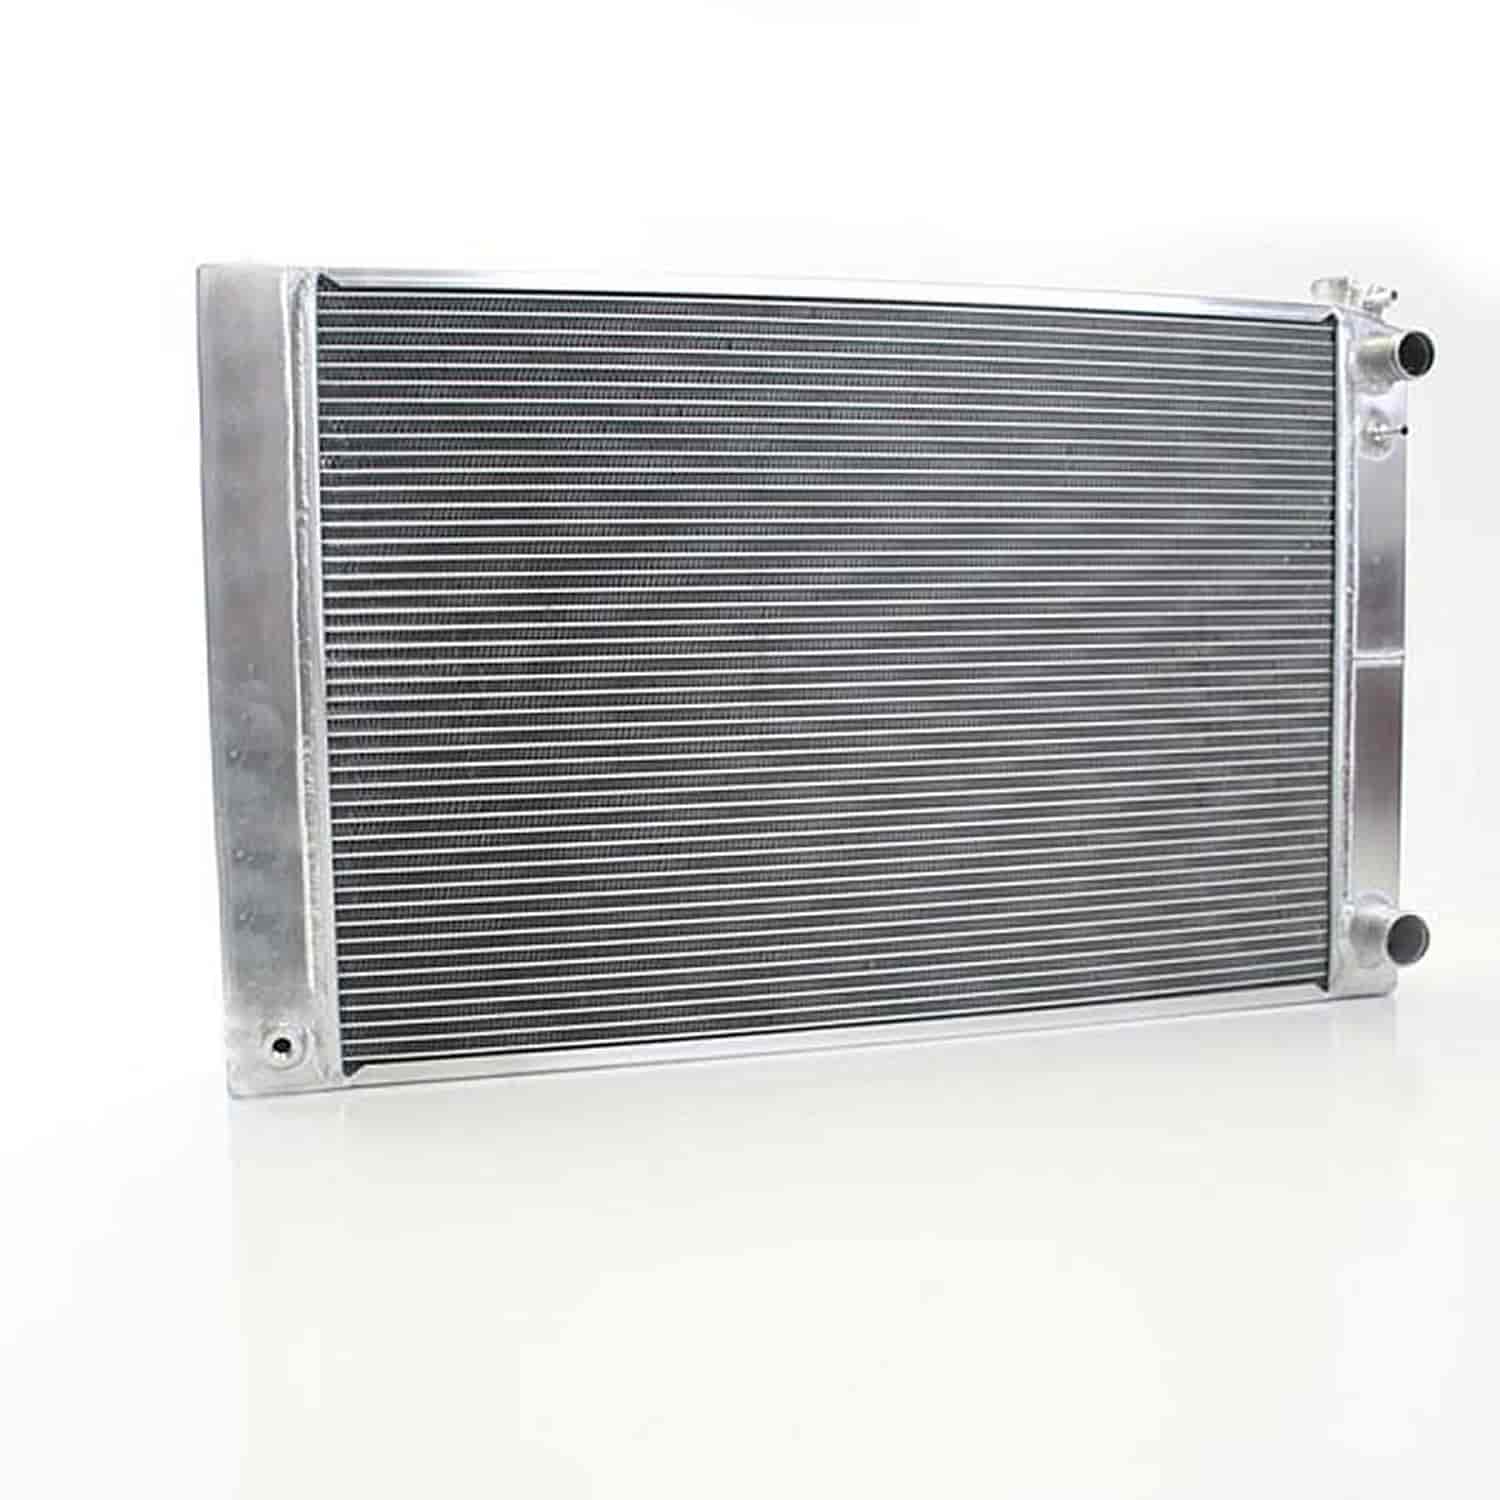 PerformanceFit Radiator 1969-1973 Ford Midsize & Mustang for